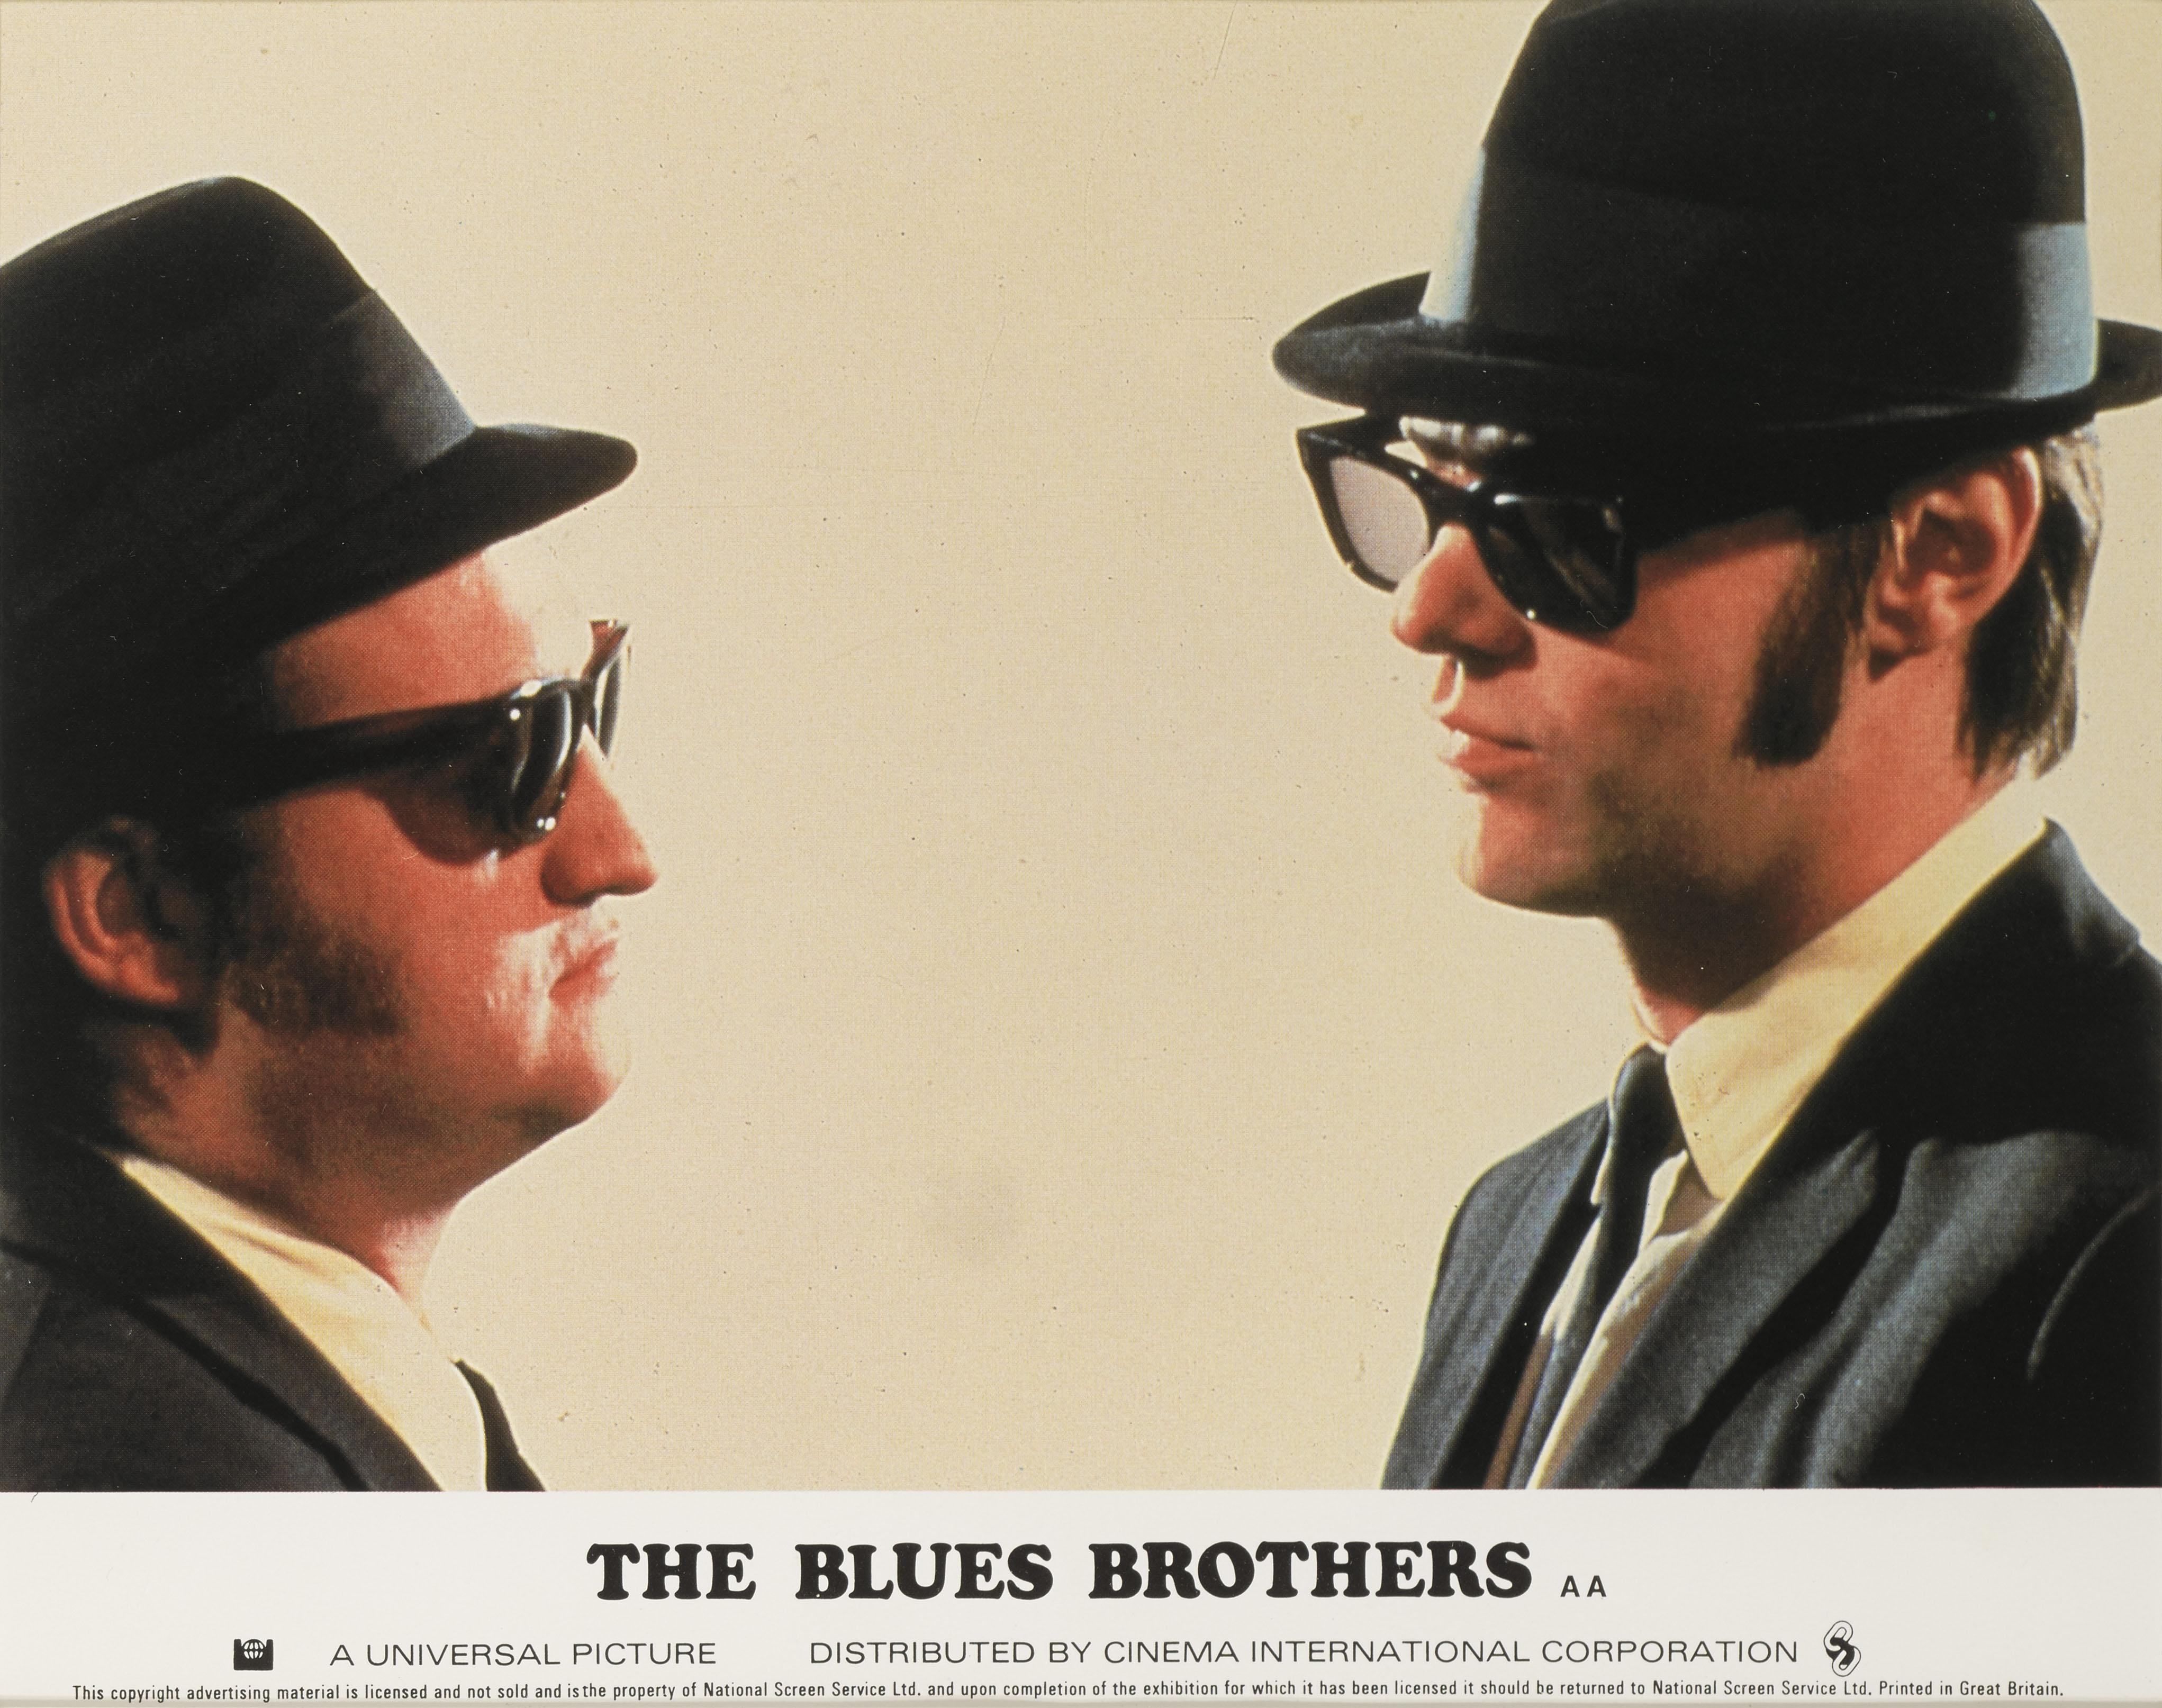 Original British front of house still used by the studio to advertise the film inside the cinema. This piece shows John Belushi, Dan Akroyd playing Jake and Elwood Blues in this cult Classic directed by John Landis.
This piece is framed in a Sapele